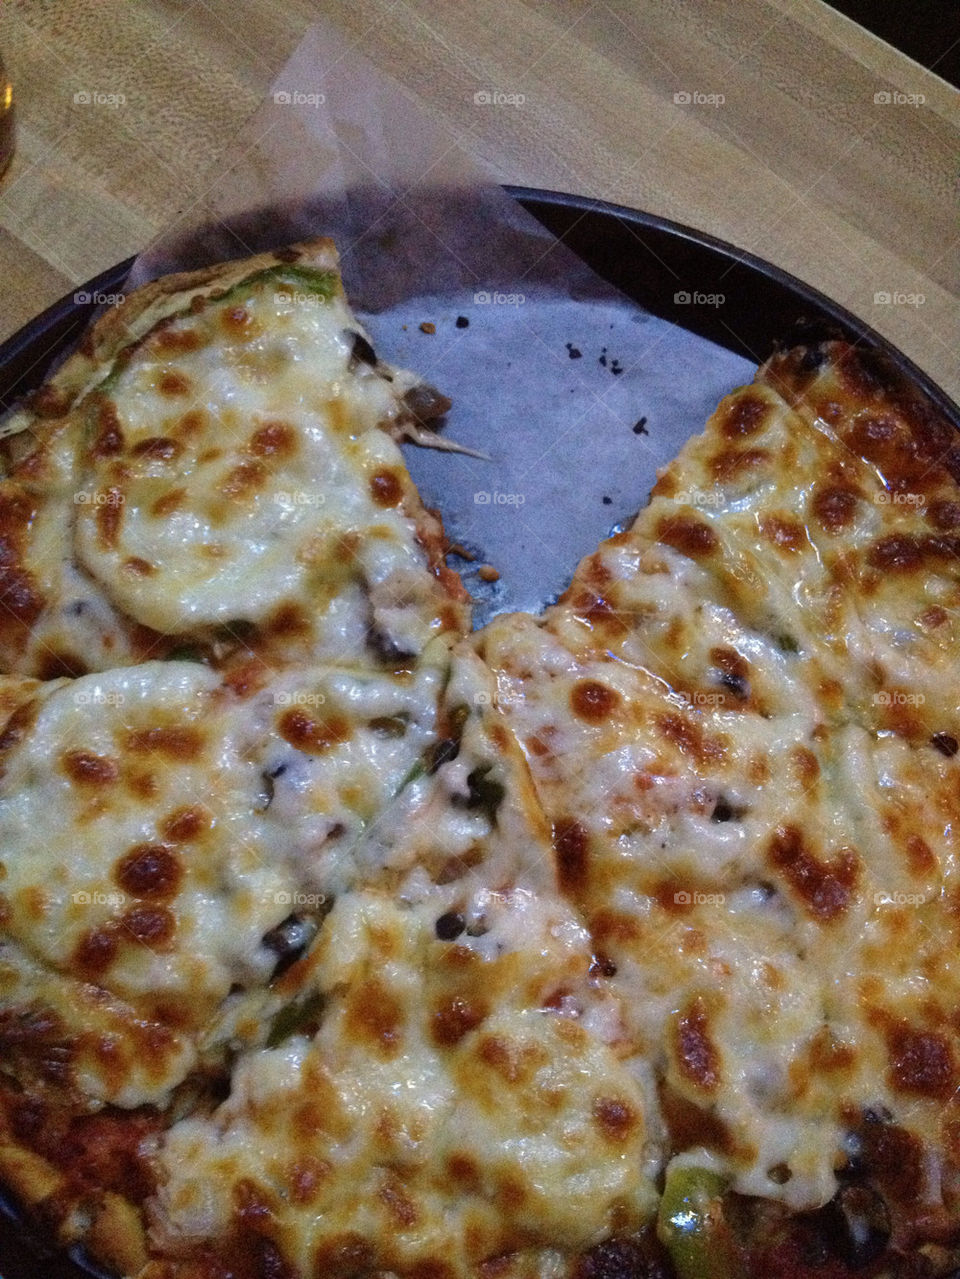 china cheese pizza ohio by detrichpix